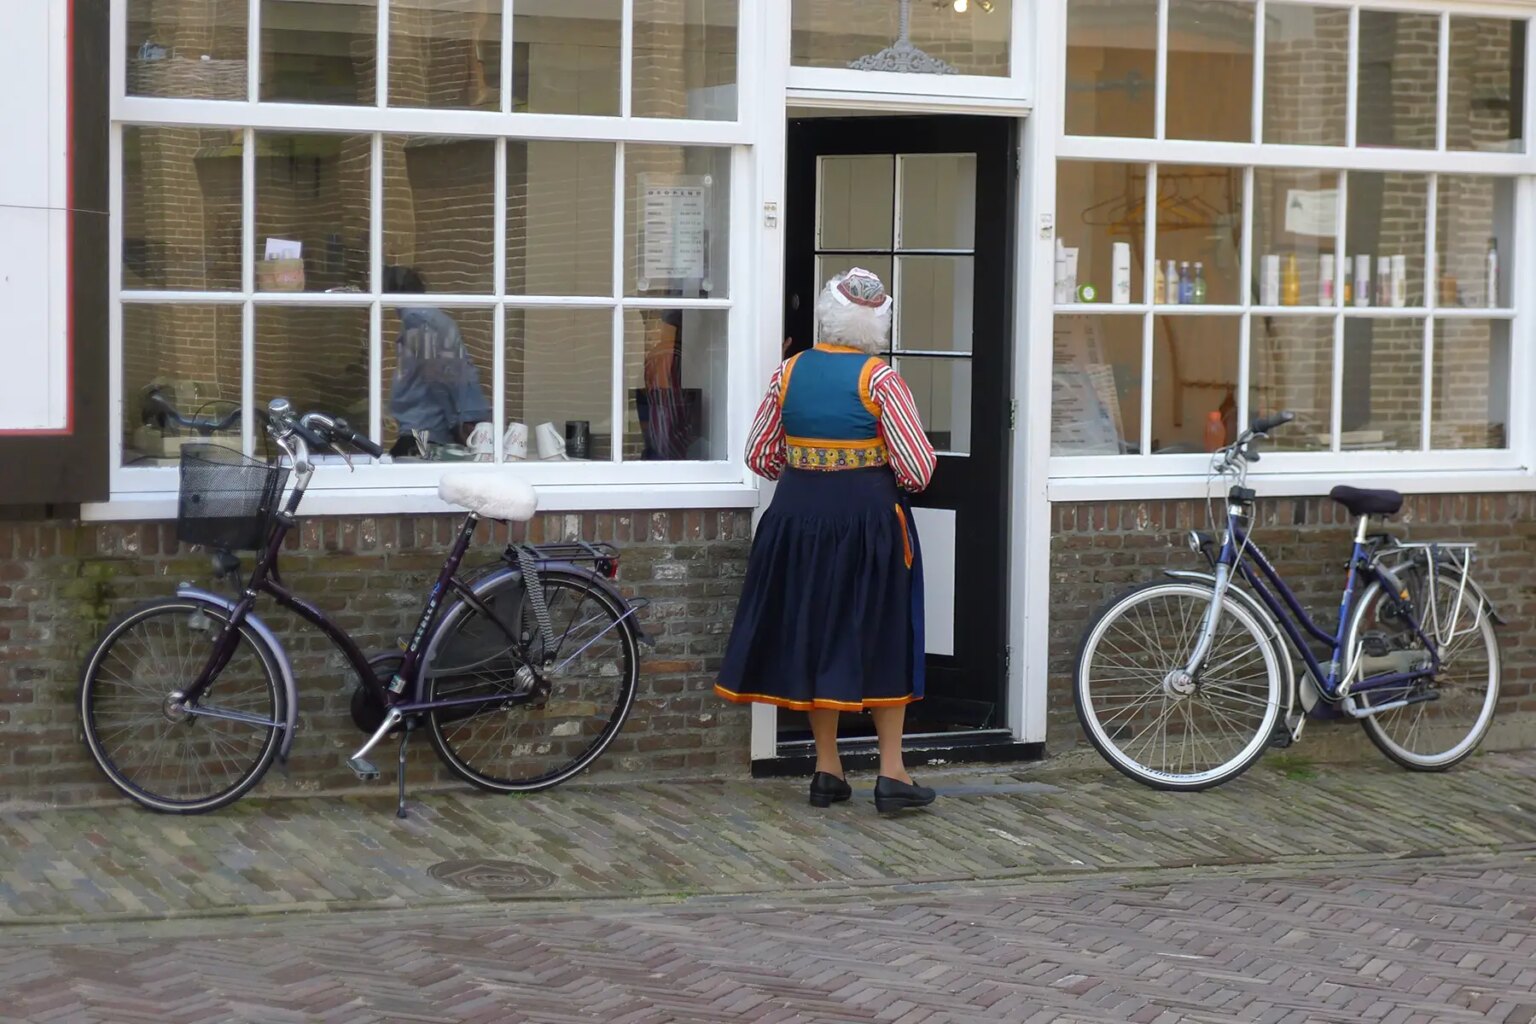 A guide to traditional Dutch clothing and culture